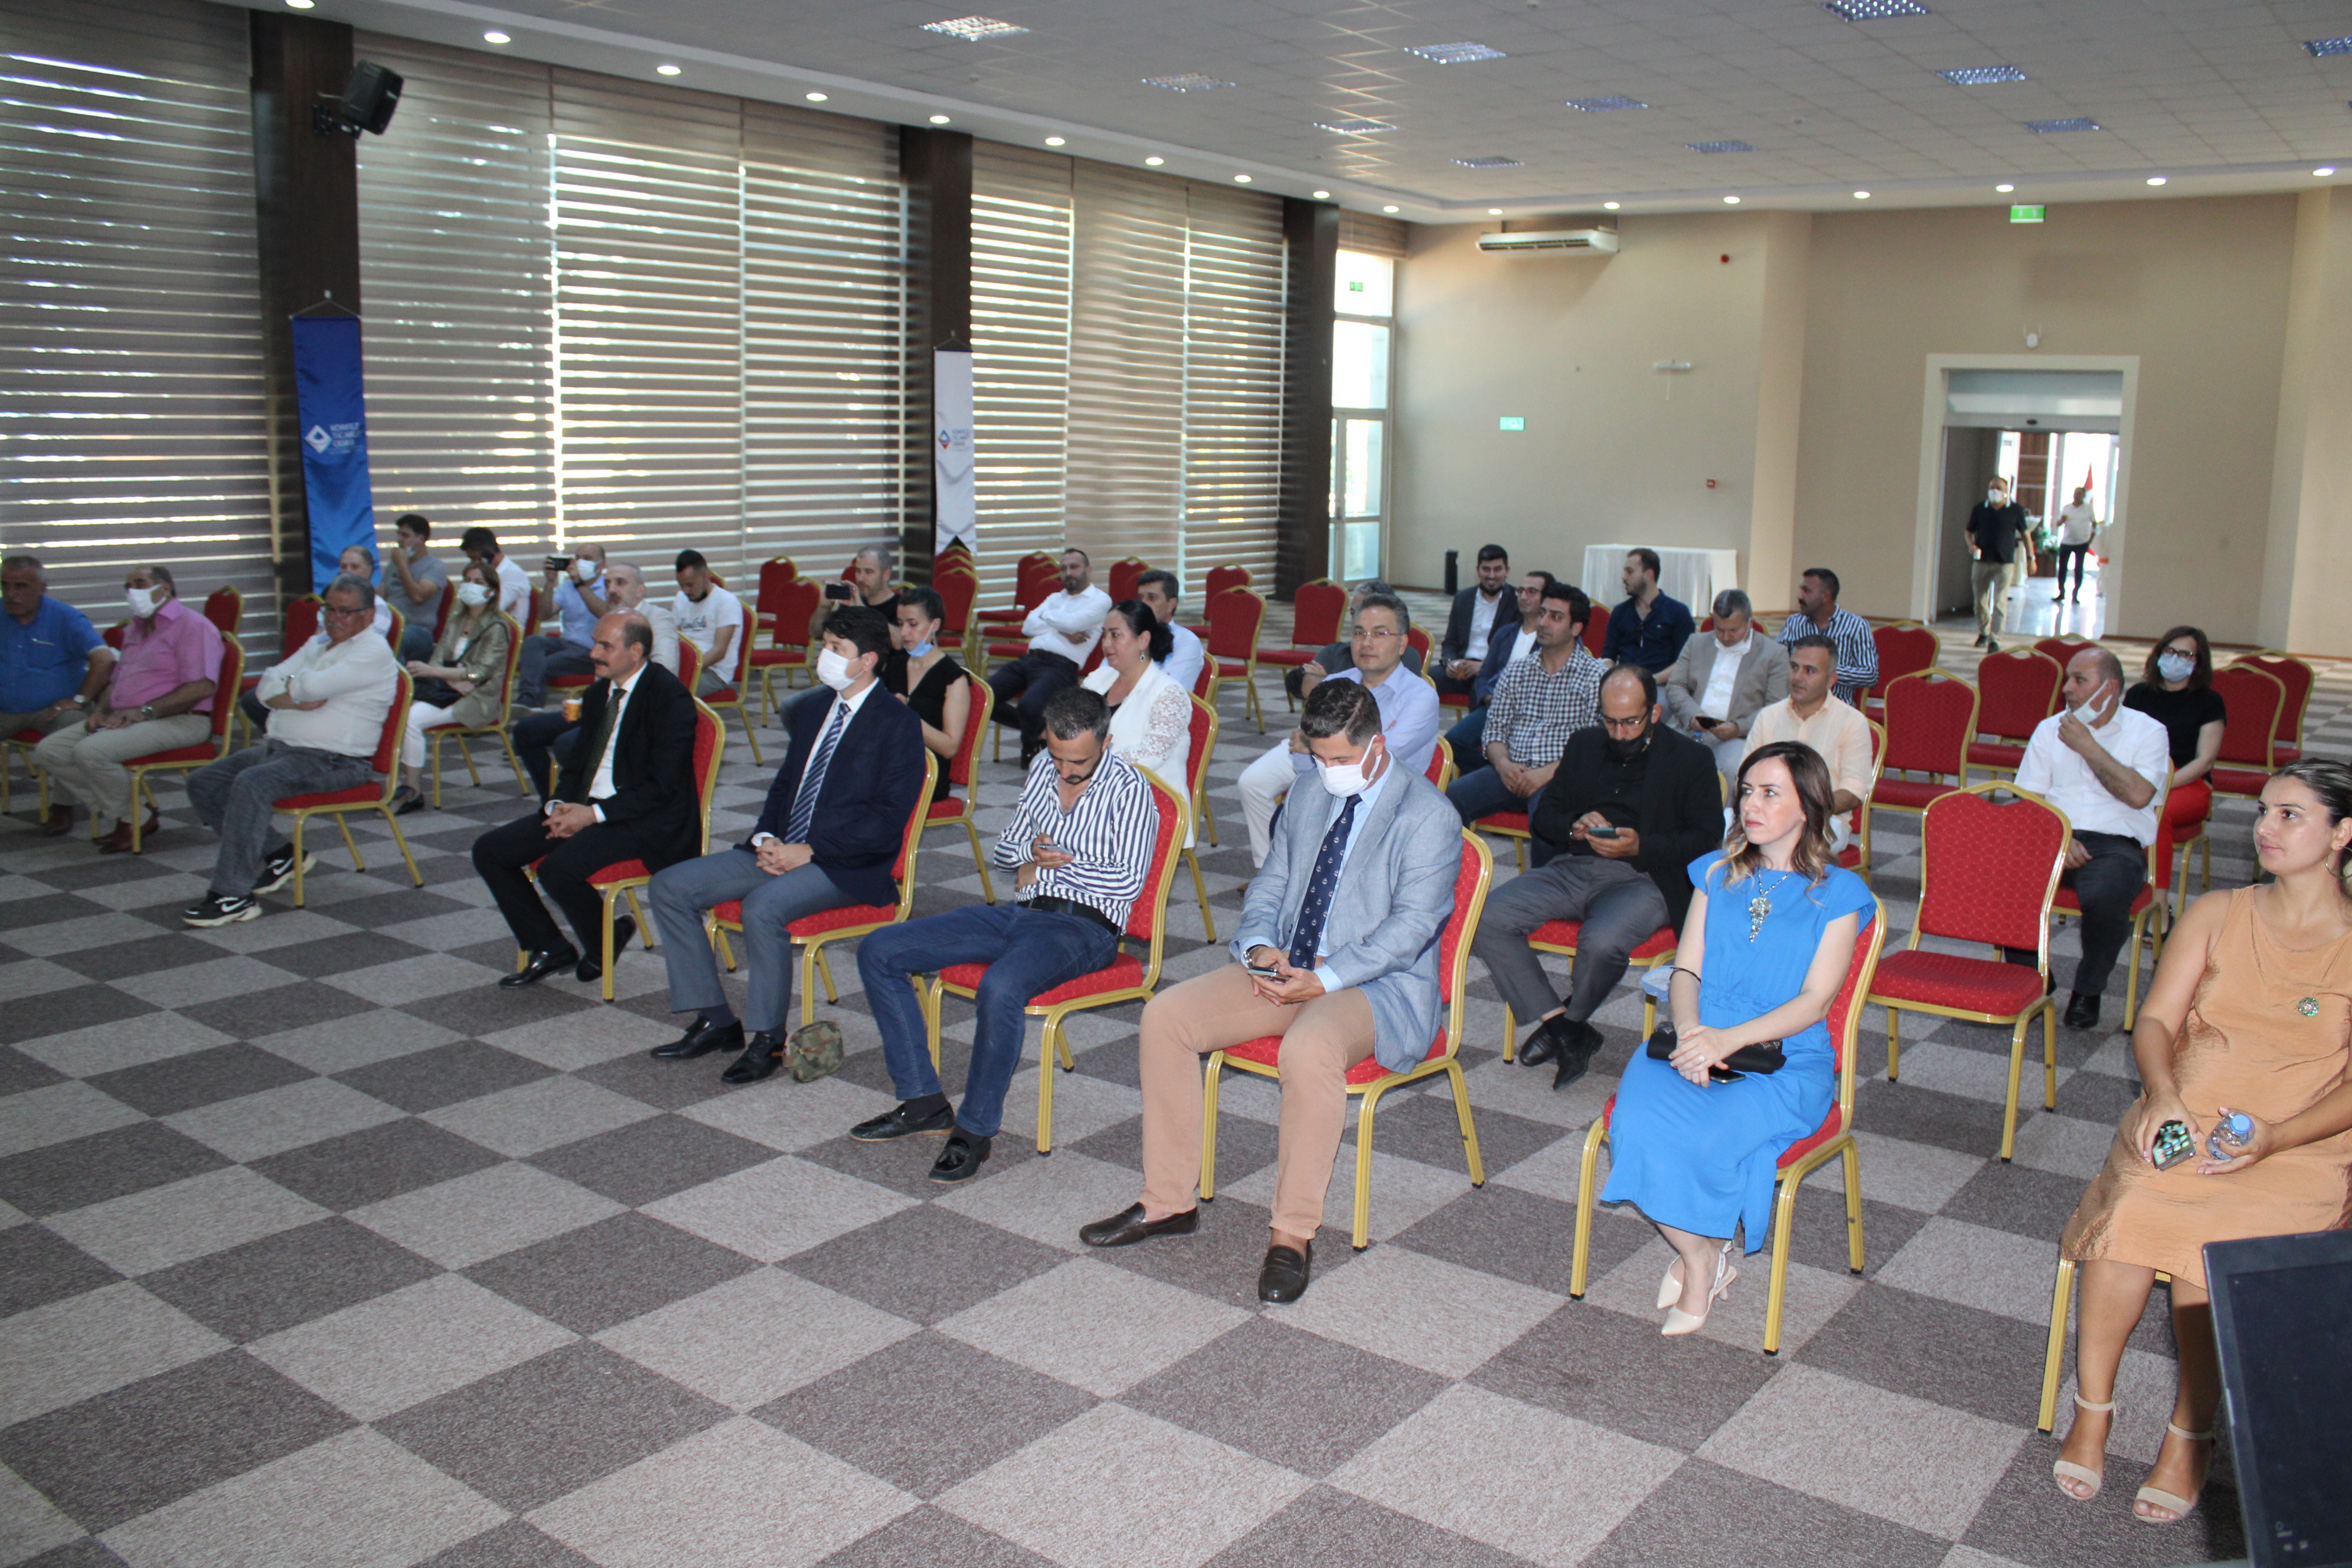 KÖRFEZ CHAMBER OF COMMERCE HELD ITS FIRST FACE-TO-FACE MEETING